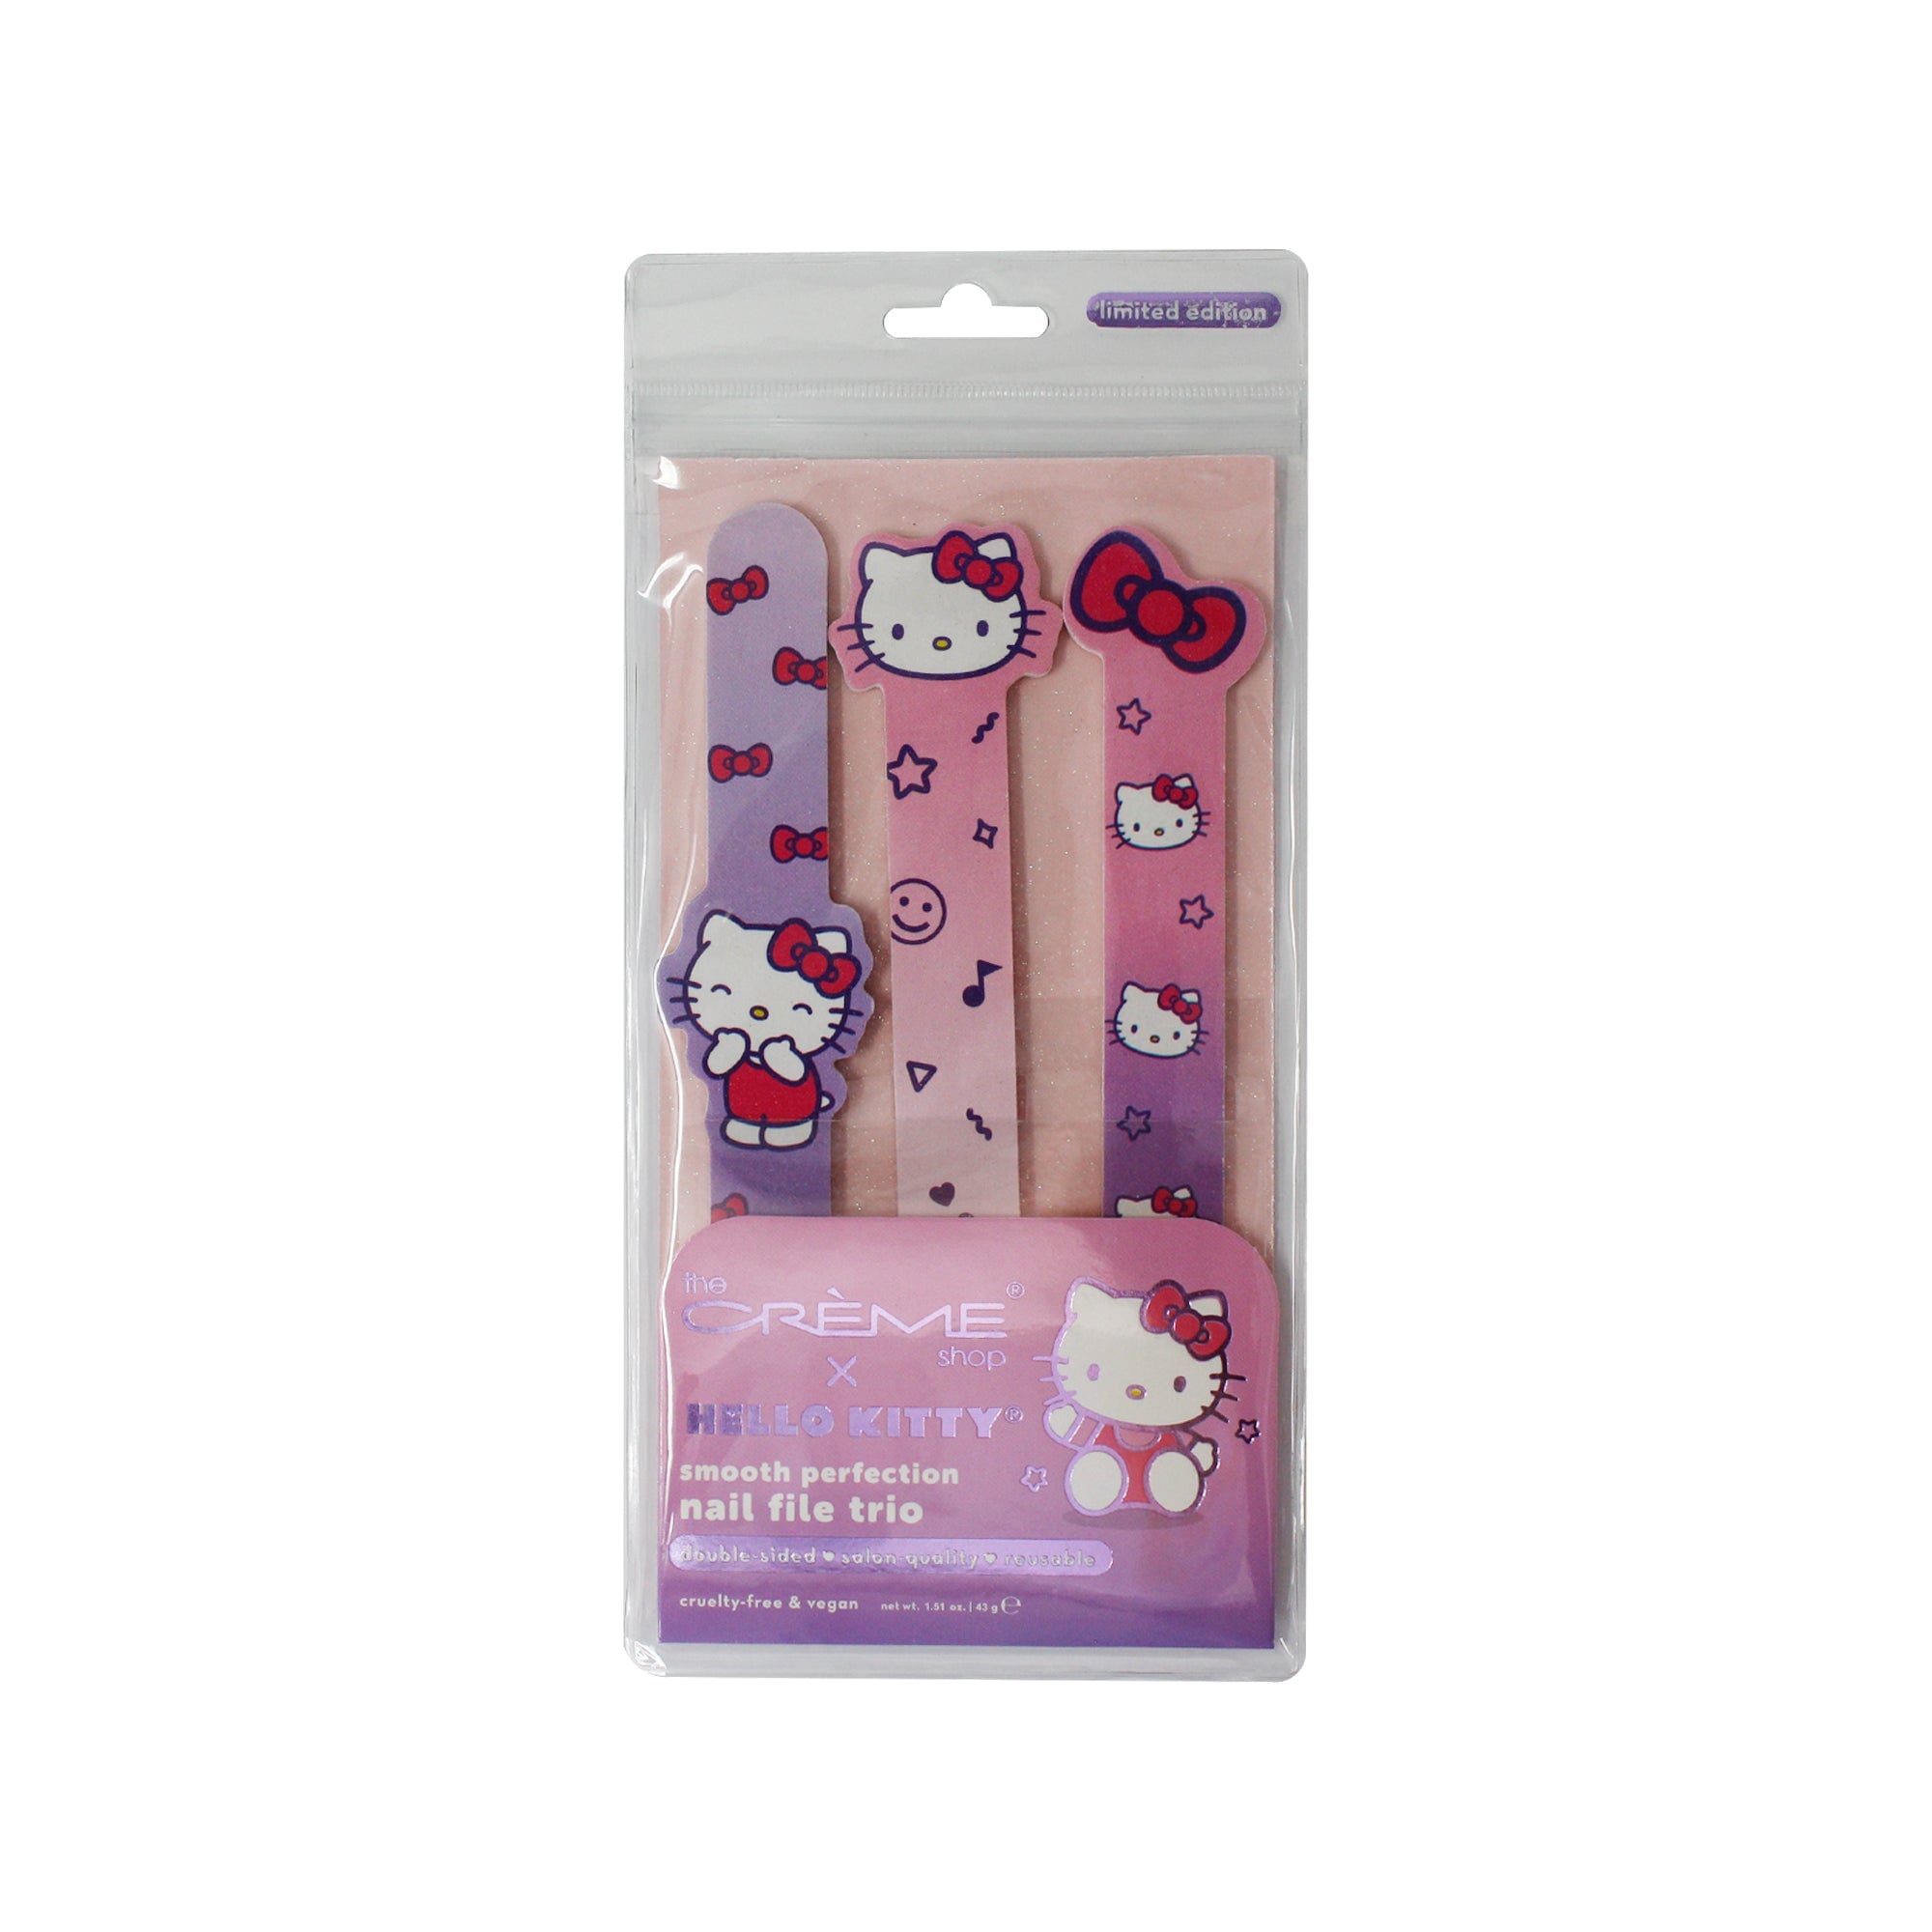 The Crème Shop x Hello Kitty(Purple) Smooth Perfection Nail Files